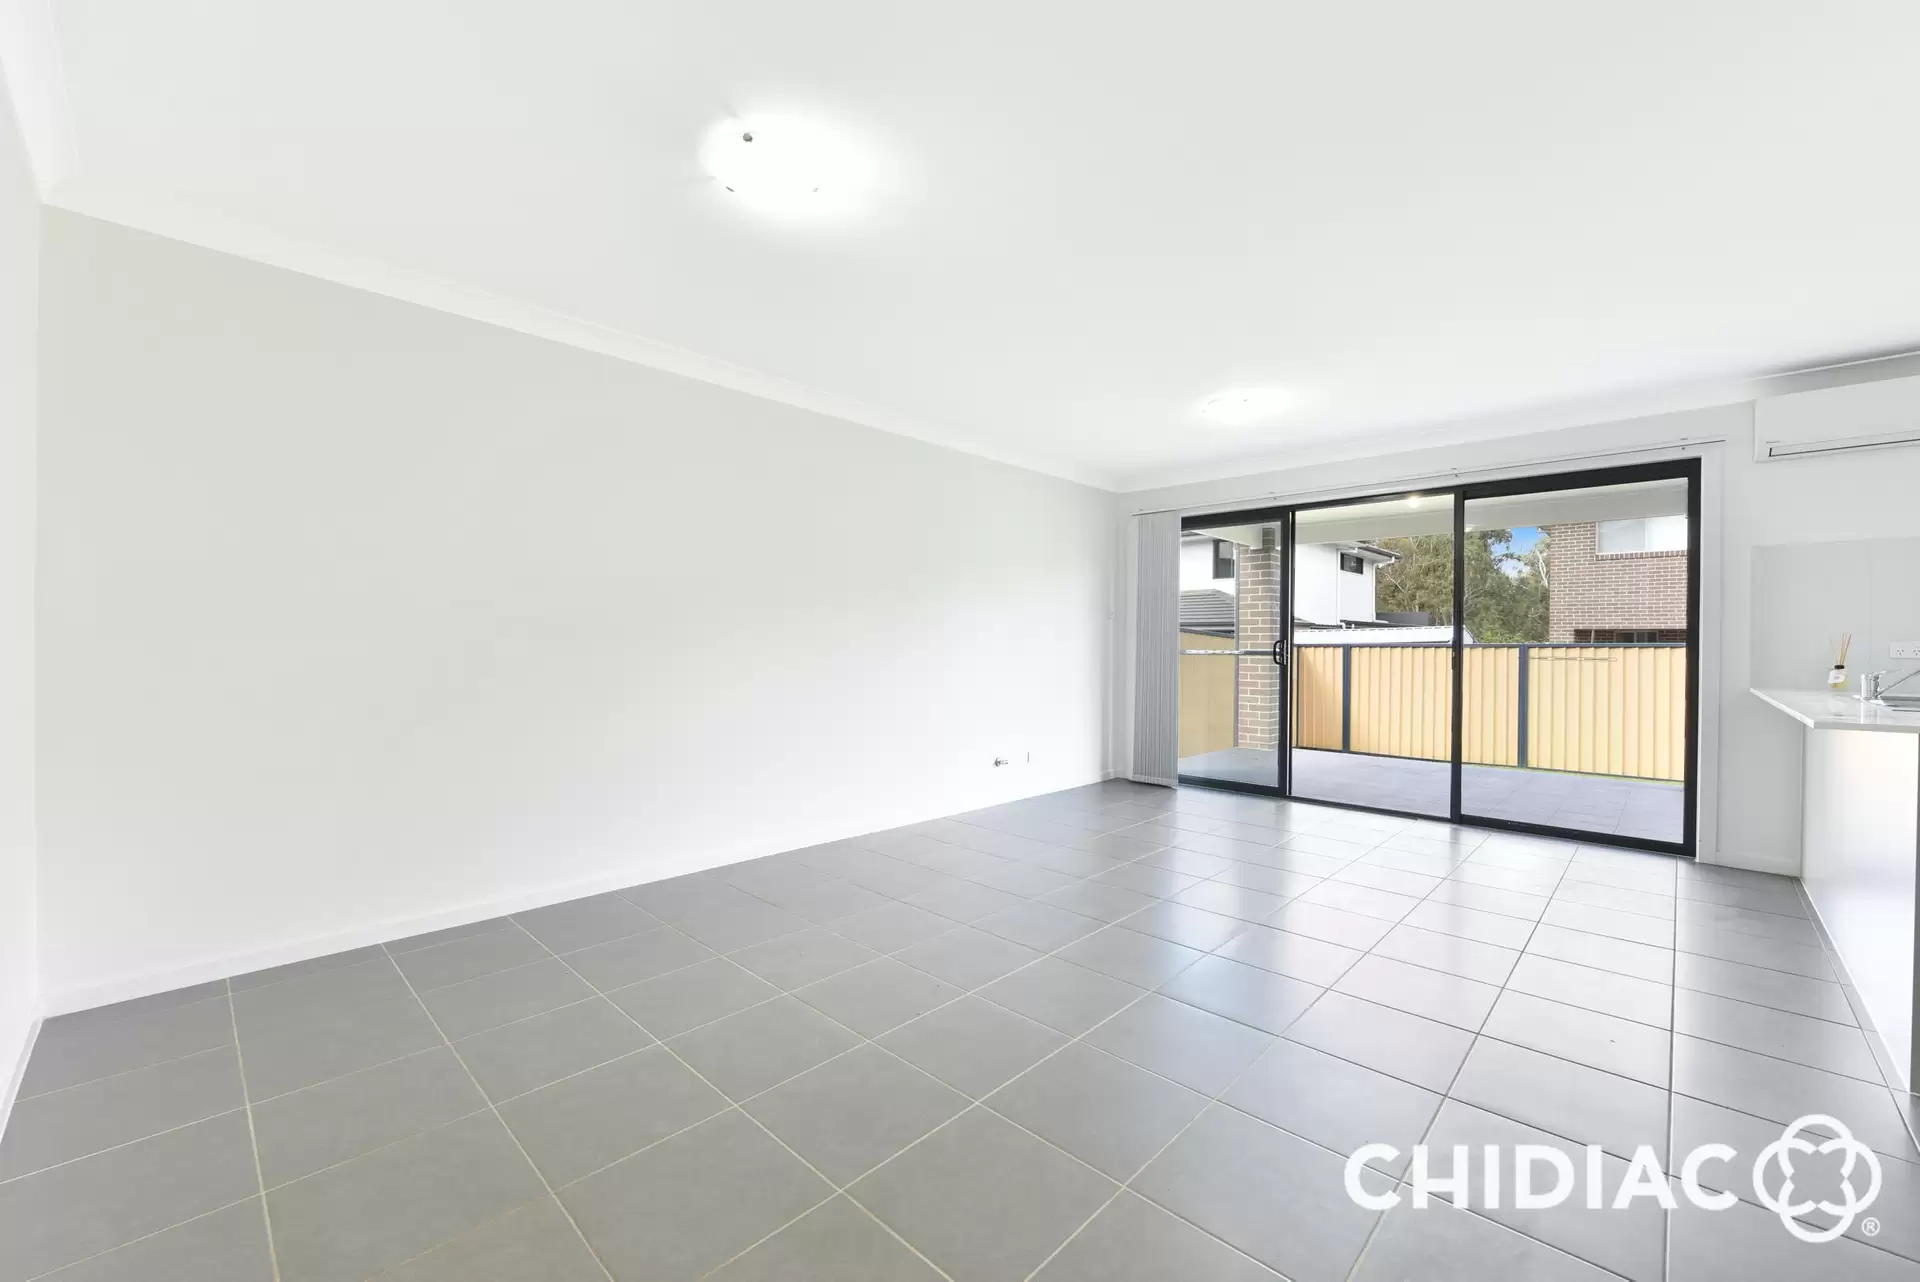 33 Changsha Road, Edmondson Park Leased by Chidiac Realty - image 1